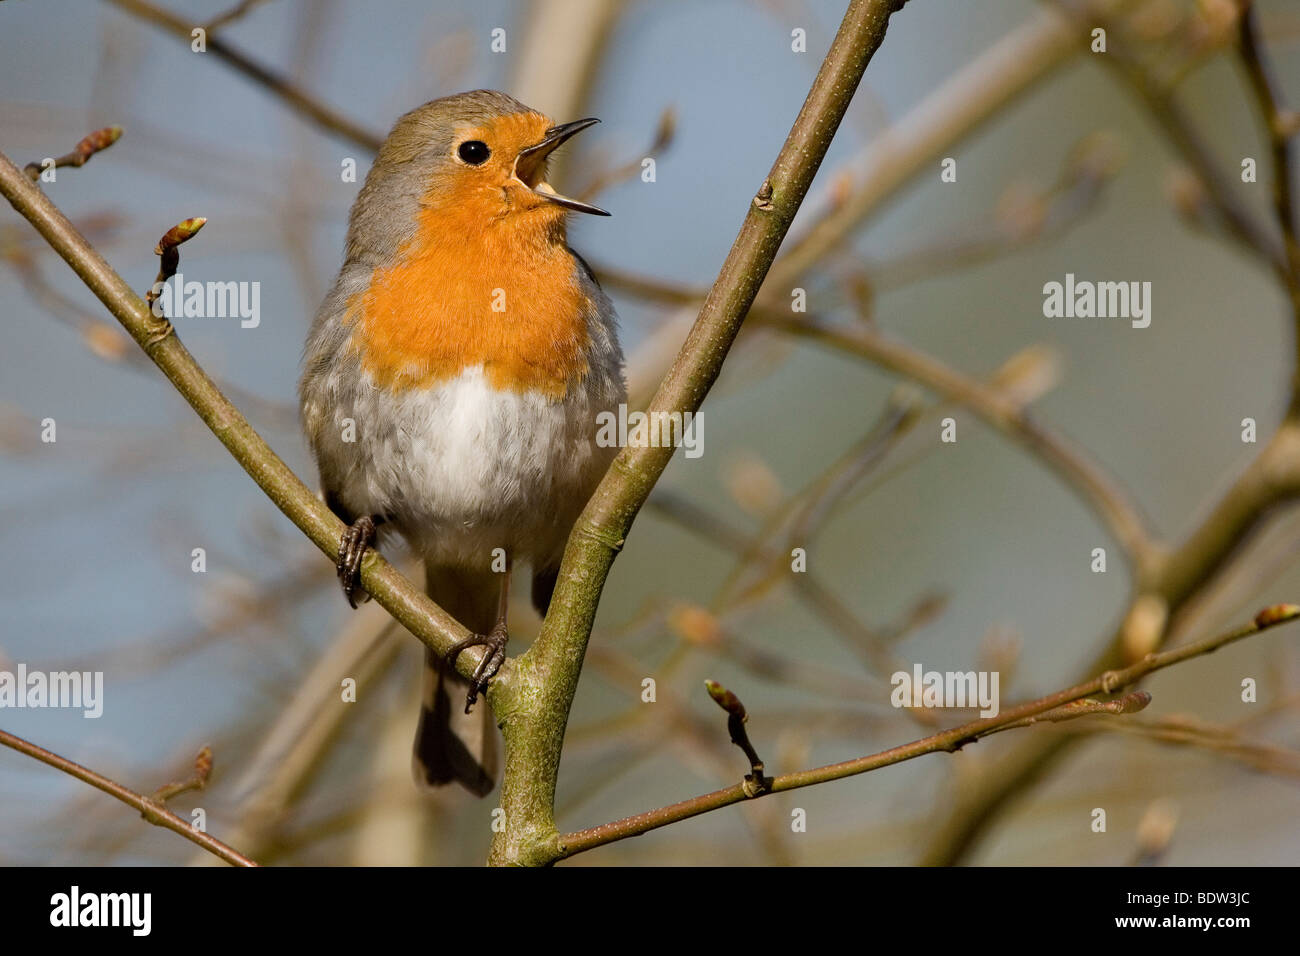 A robin sitting in a tree Stock Photo